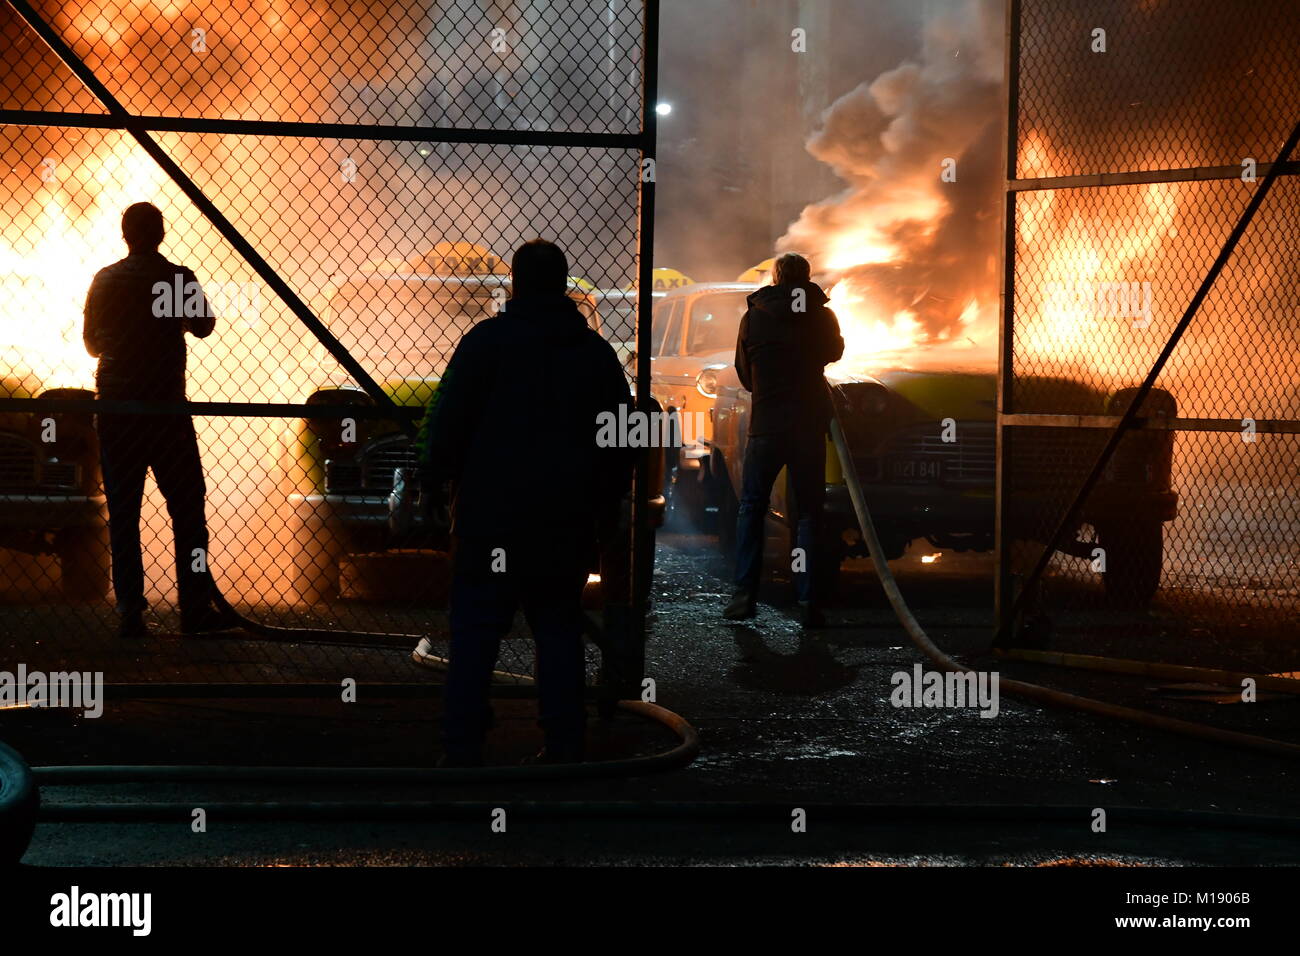 New York City, United States. 27th Jan, 2018. Filming continued with a bang on Martin Scorsese's 66th motion picture as director, 'The Irishman,' as pyrotechnic shots were completed in Brooklyn's Gowanus neighborhood. The film stars Robert De Niro, Joe Pesci and Al Pacino, and which depicts an aging hitman's recollection of assassinating Teamster's boss Jimmy Hoffa. Credit: Andy Katz/Pacific Press/Alamy Live News Stock Photo